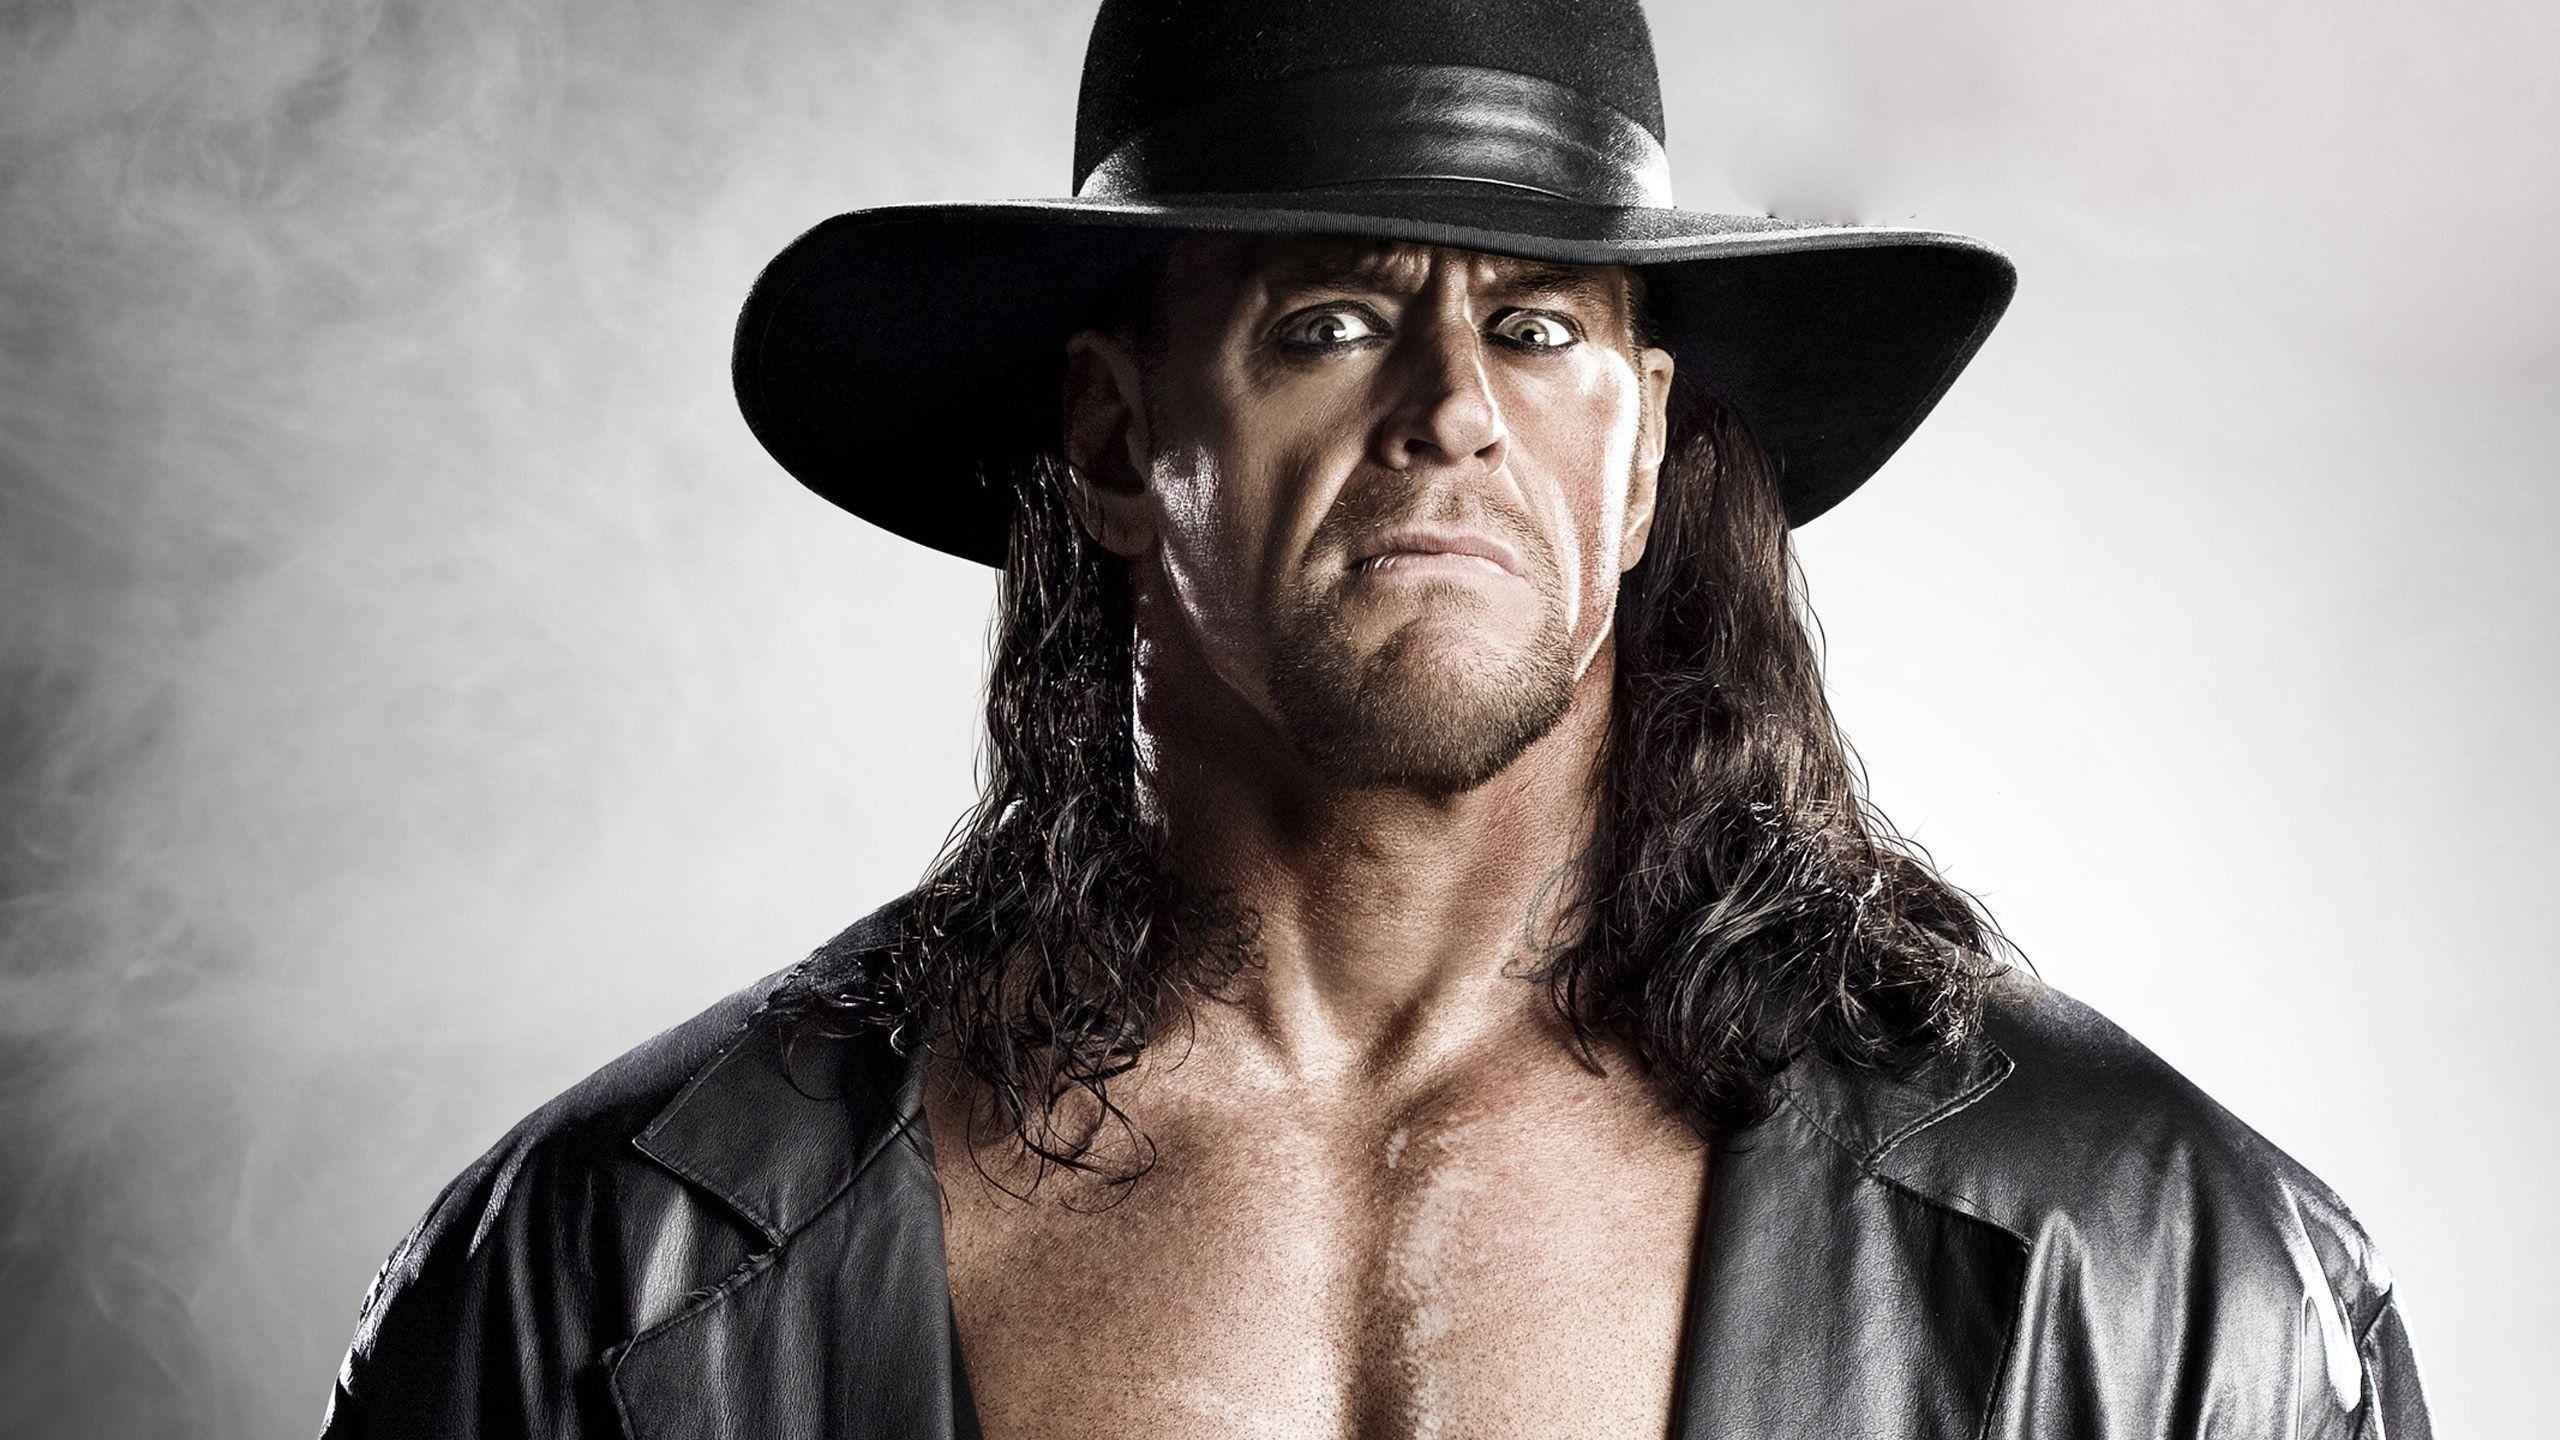 wwe undertaker image Wallpapers newHD Wallpapers new